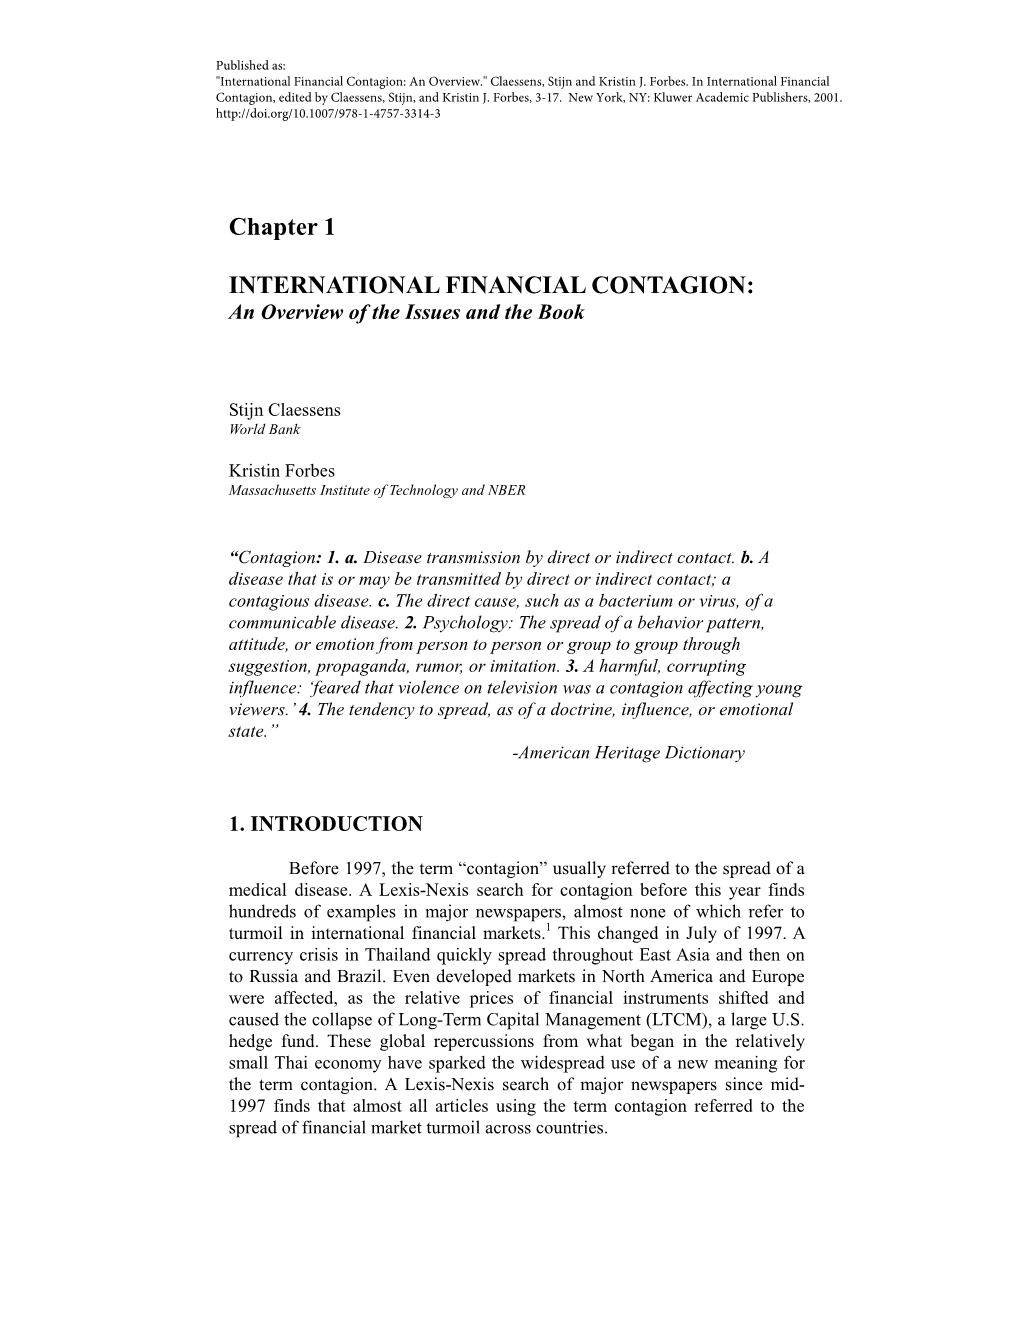 Chapter 1 INTERNATIONAL FINANCIAL CONTAGION